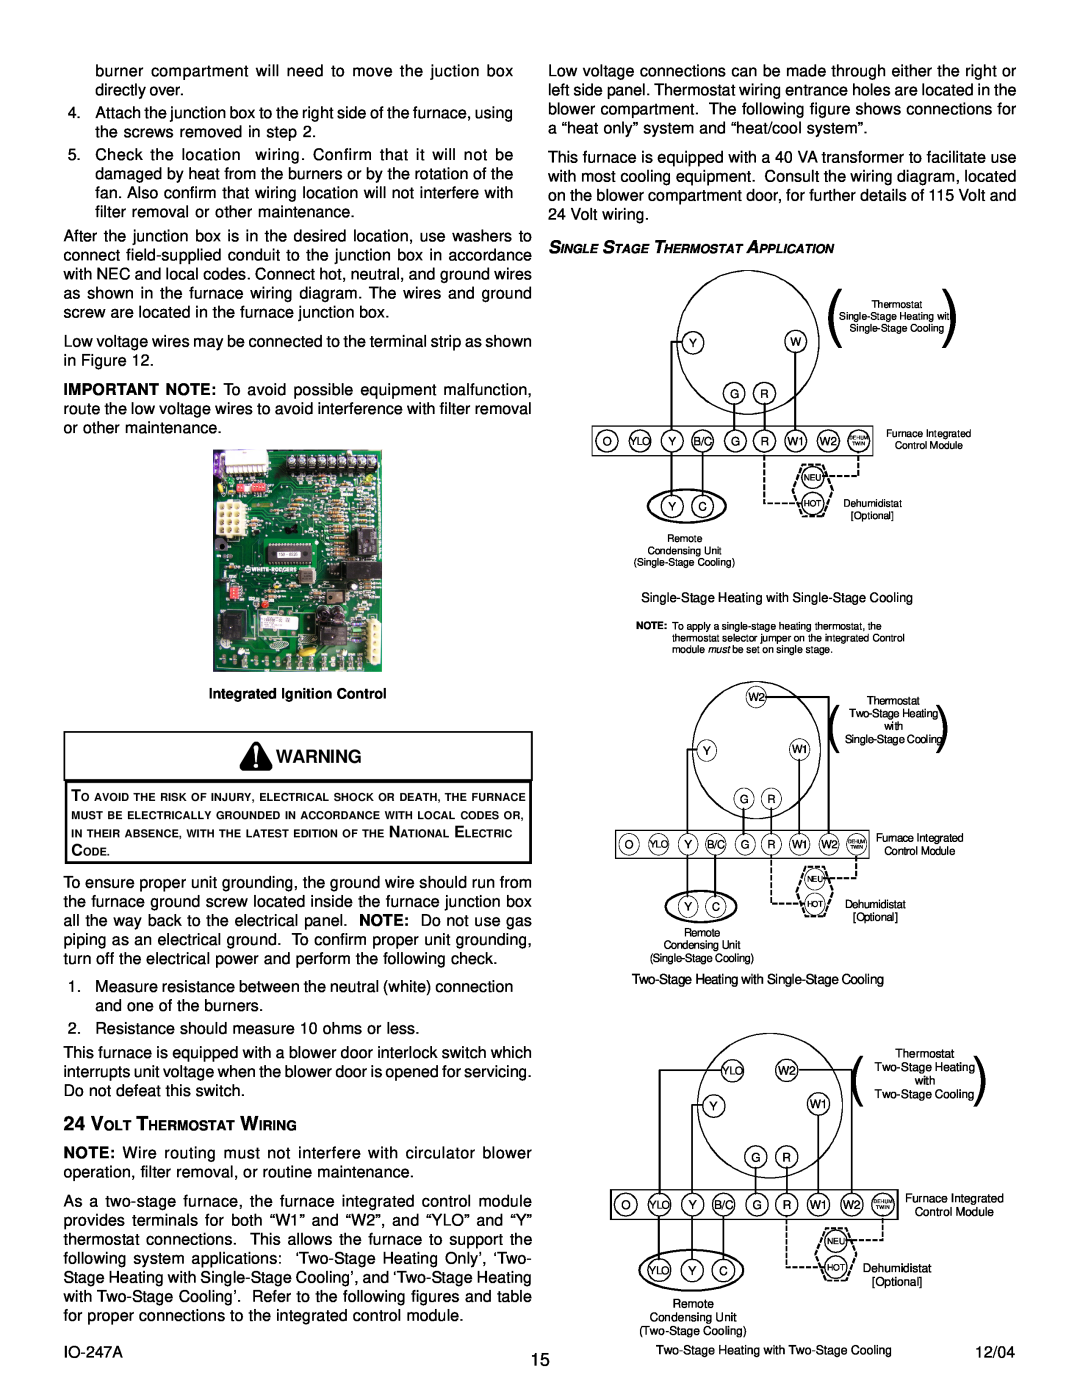 Goodman Mfg AMV8 instruction manual Integrated Ignition Control, Volt Thermostat Wiring 